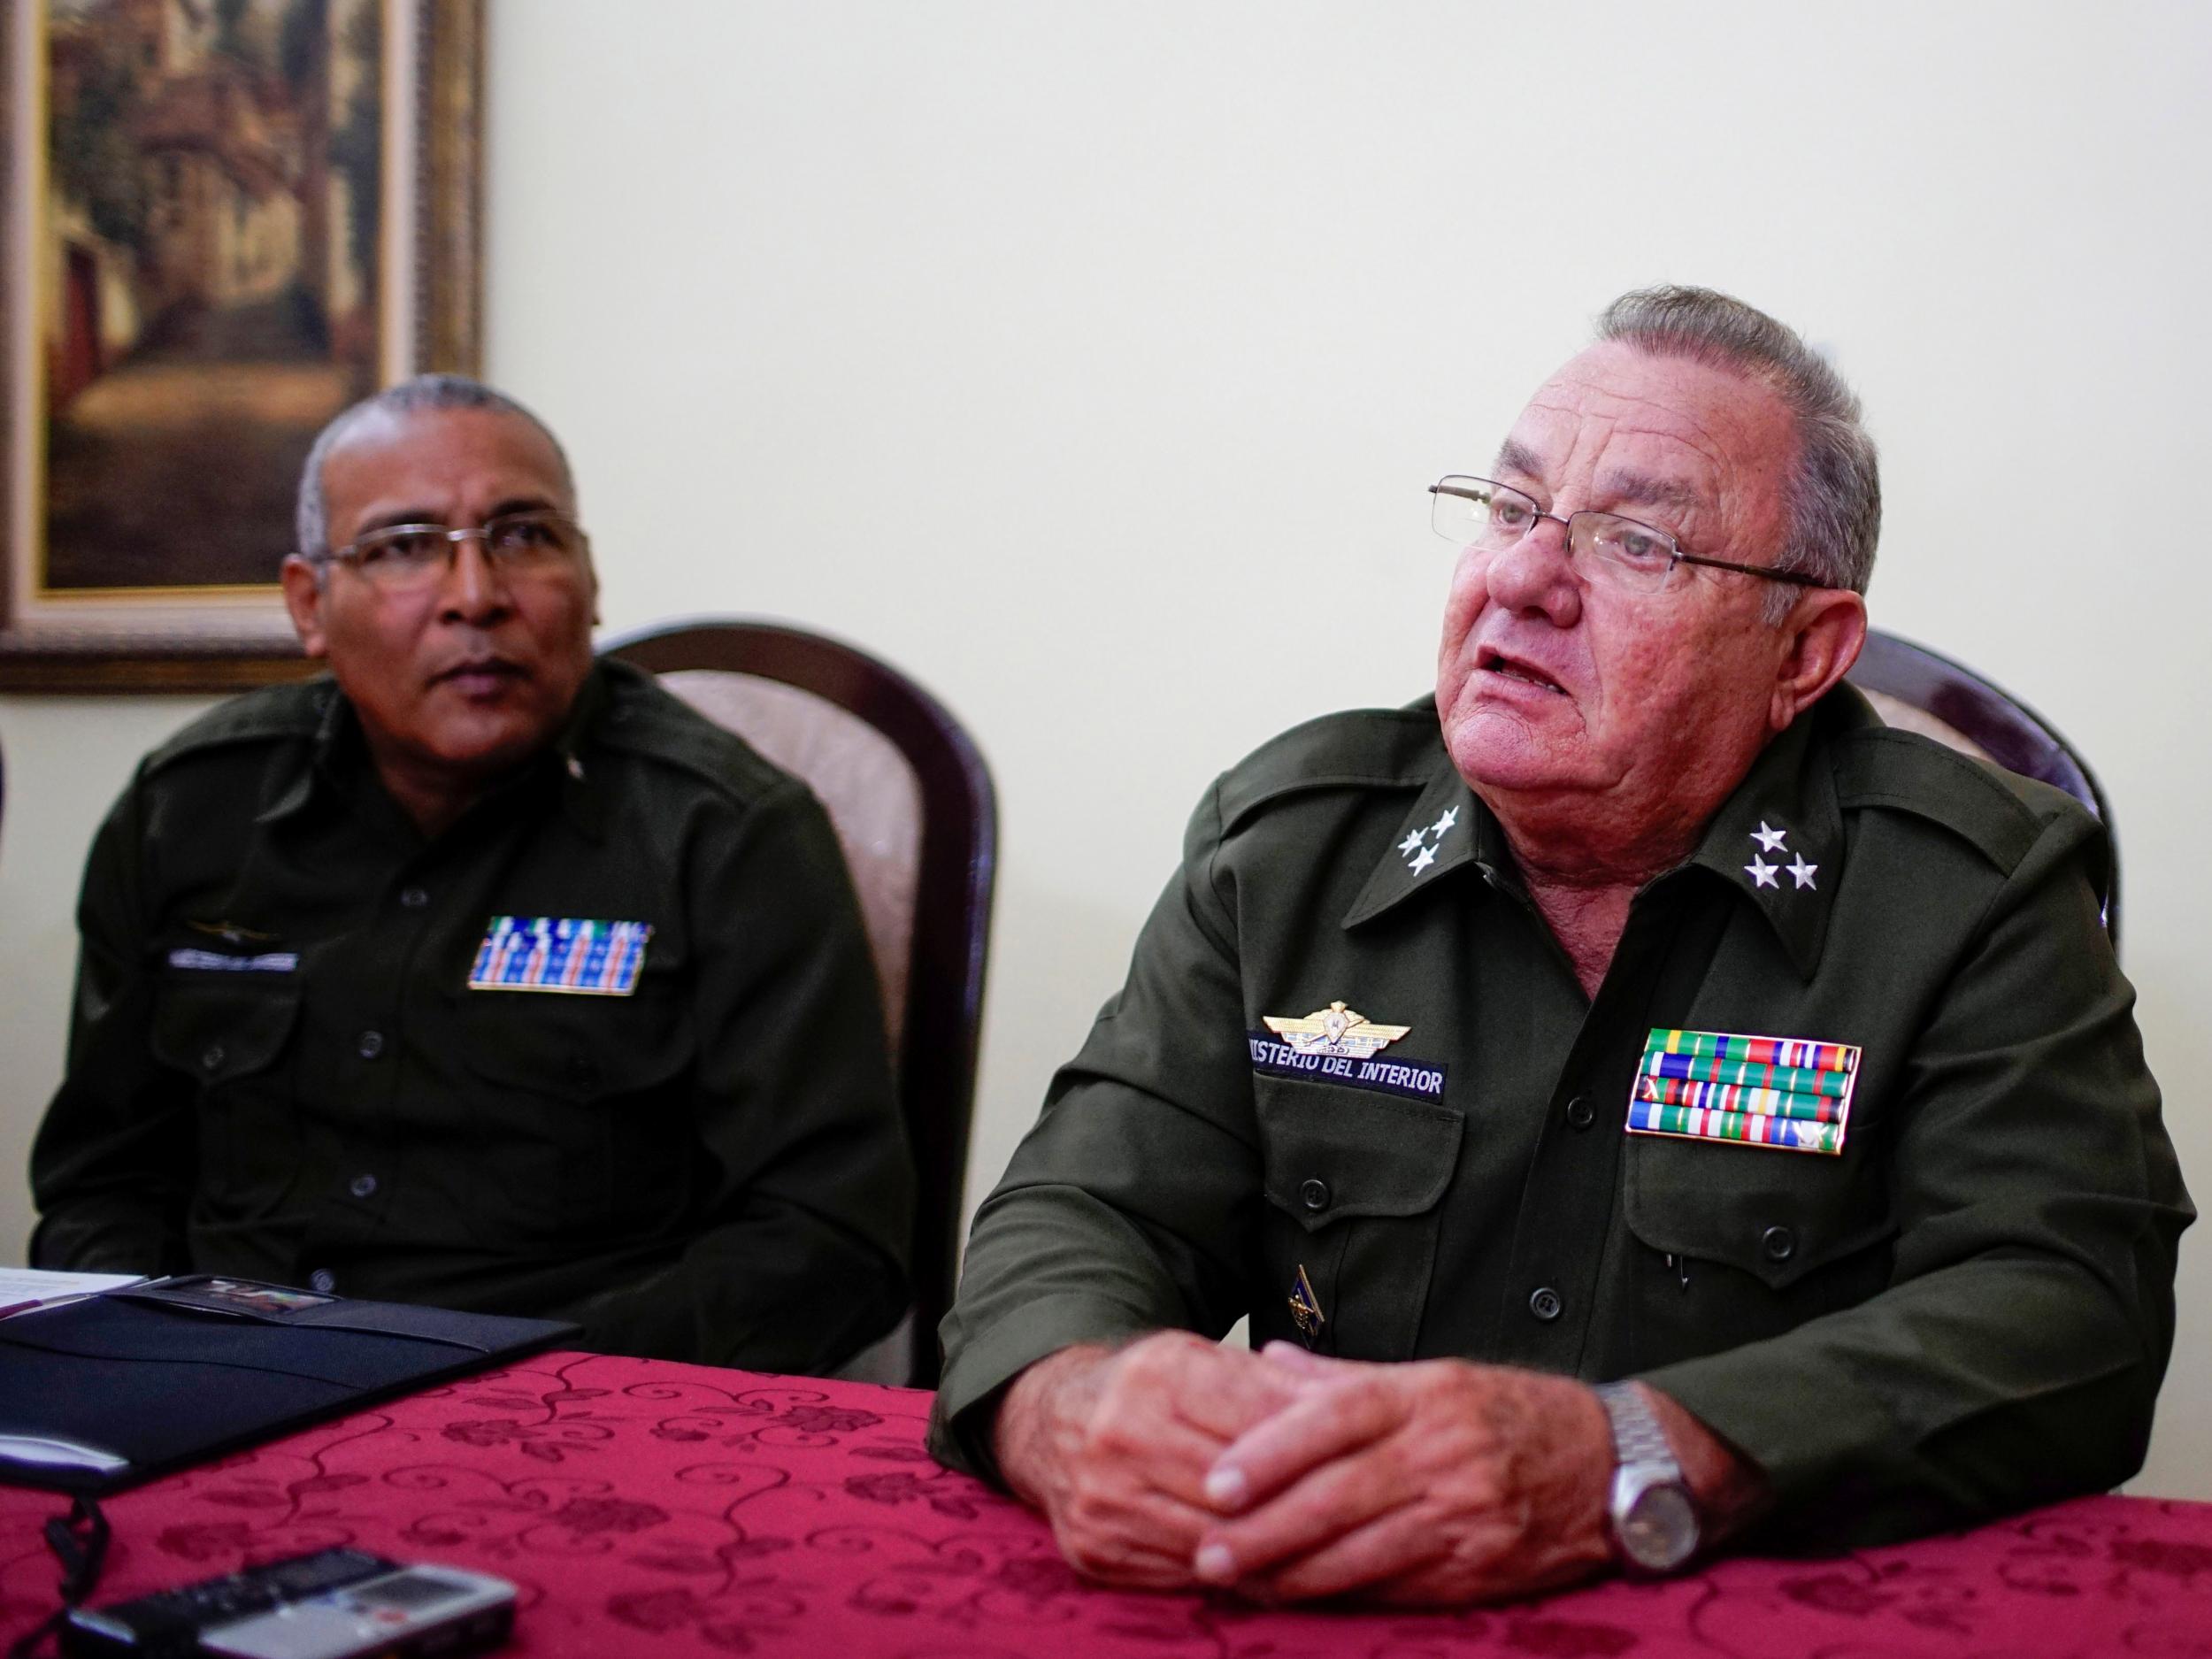 Cuban Interior Ministry's Colonel Ramiro Ramirez, who is leading a team investigating US complaints of "attacks" on diplomats in Havana